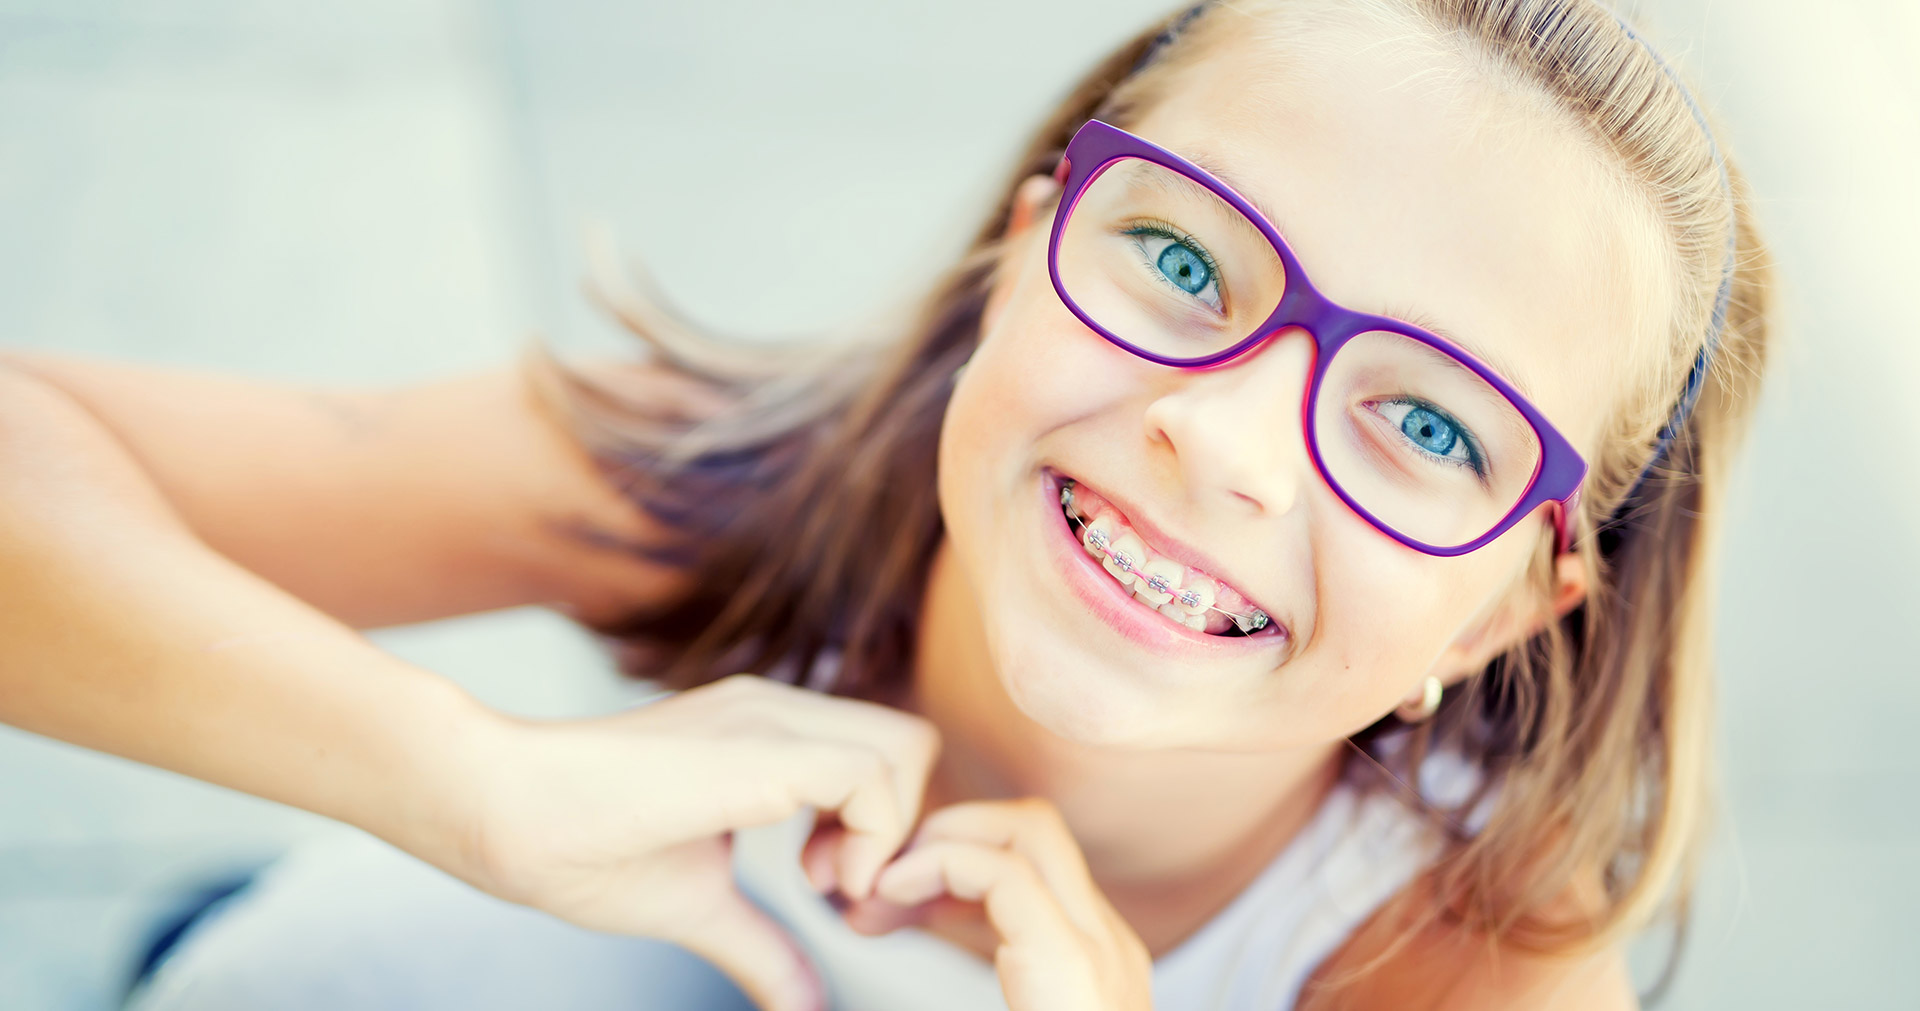 A young girl with glasses and a blue heart in her hand, smiling at the camera.